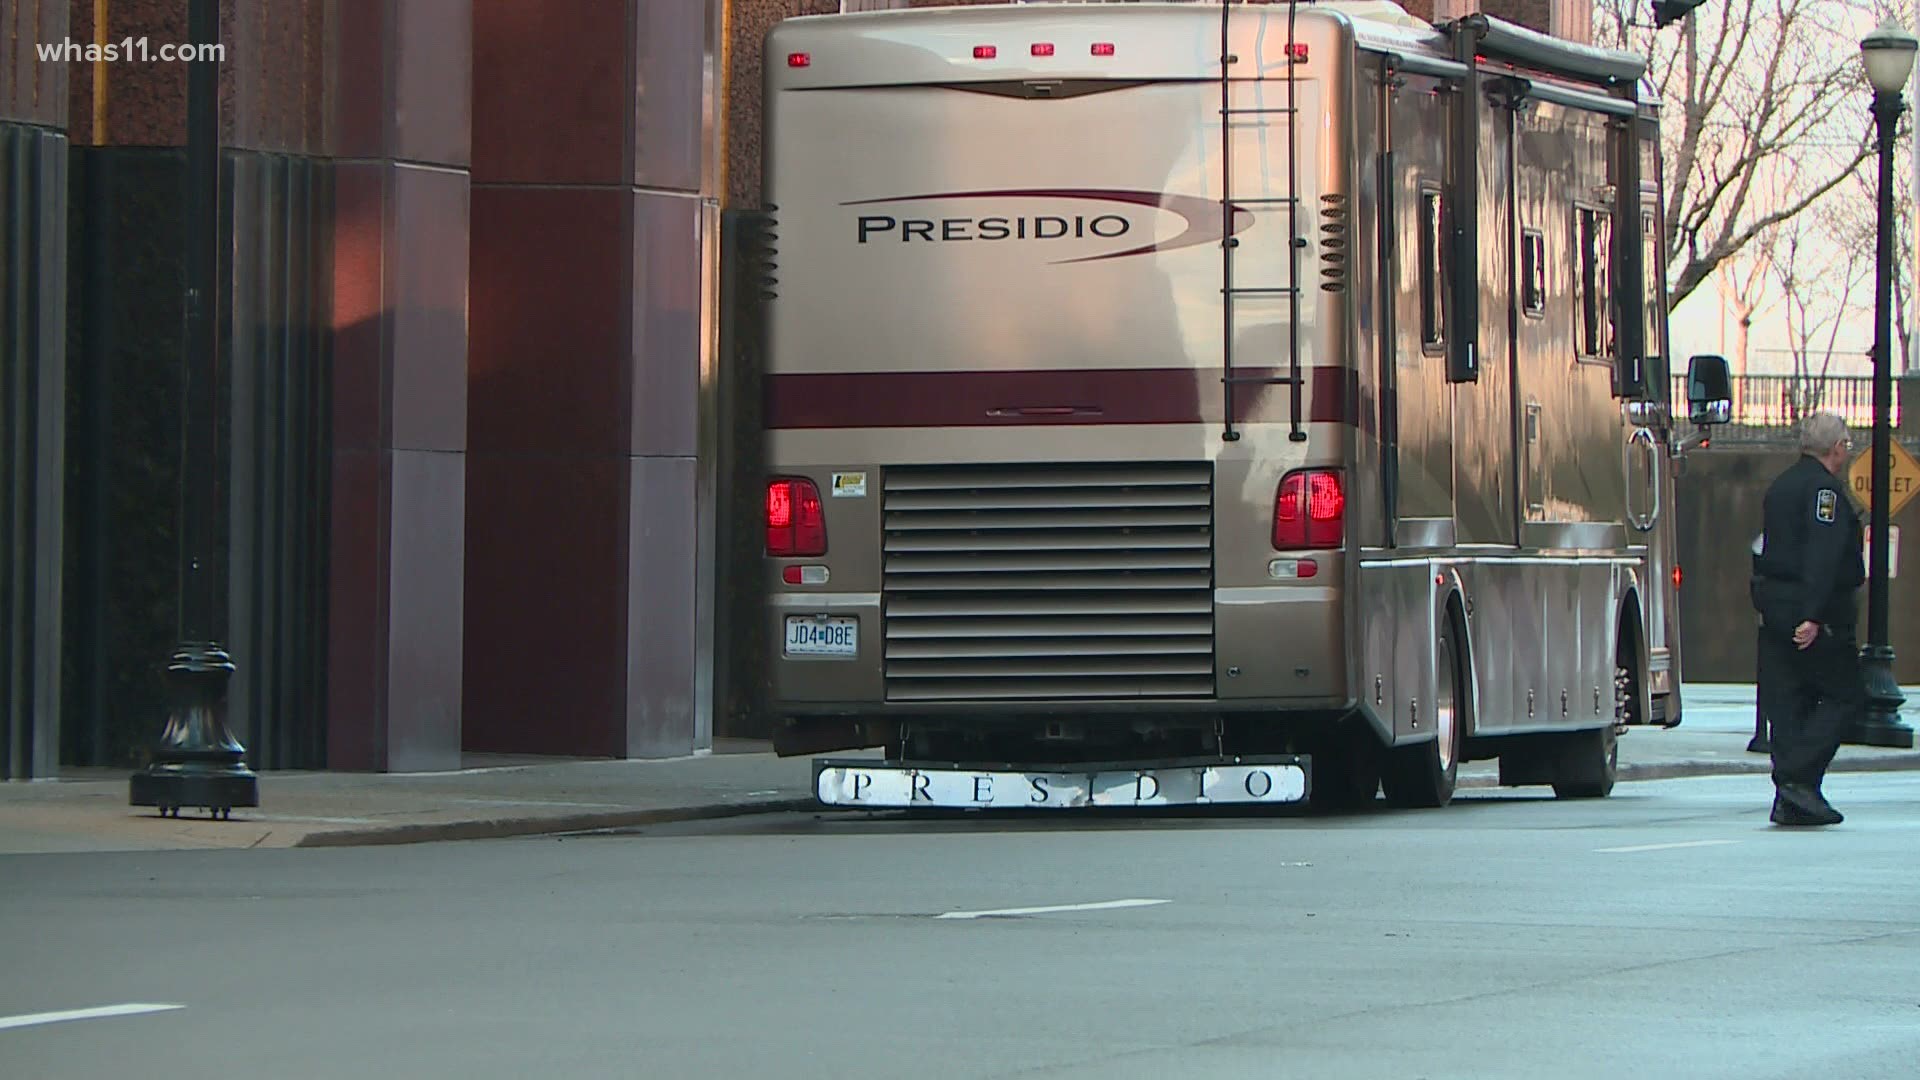 An RV parked near the Humana Building became the center of a police investigation.